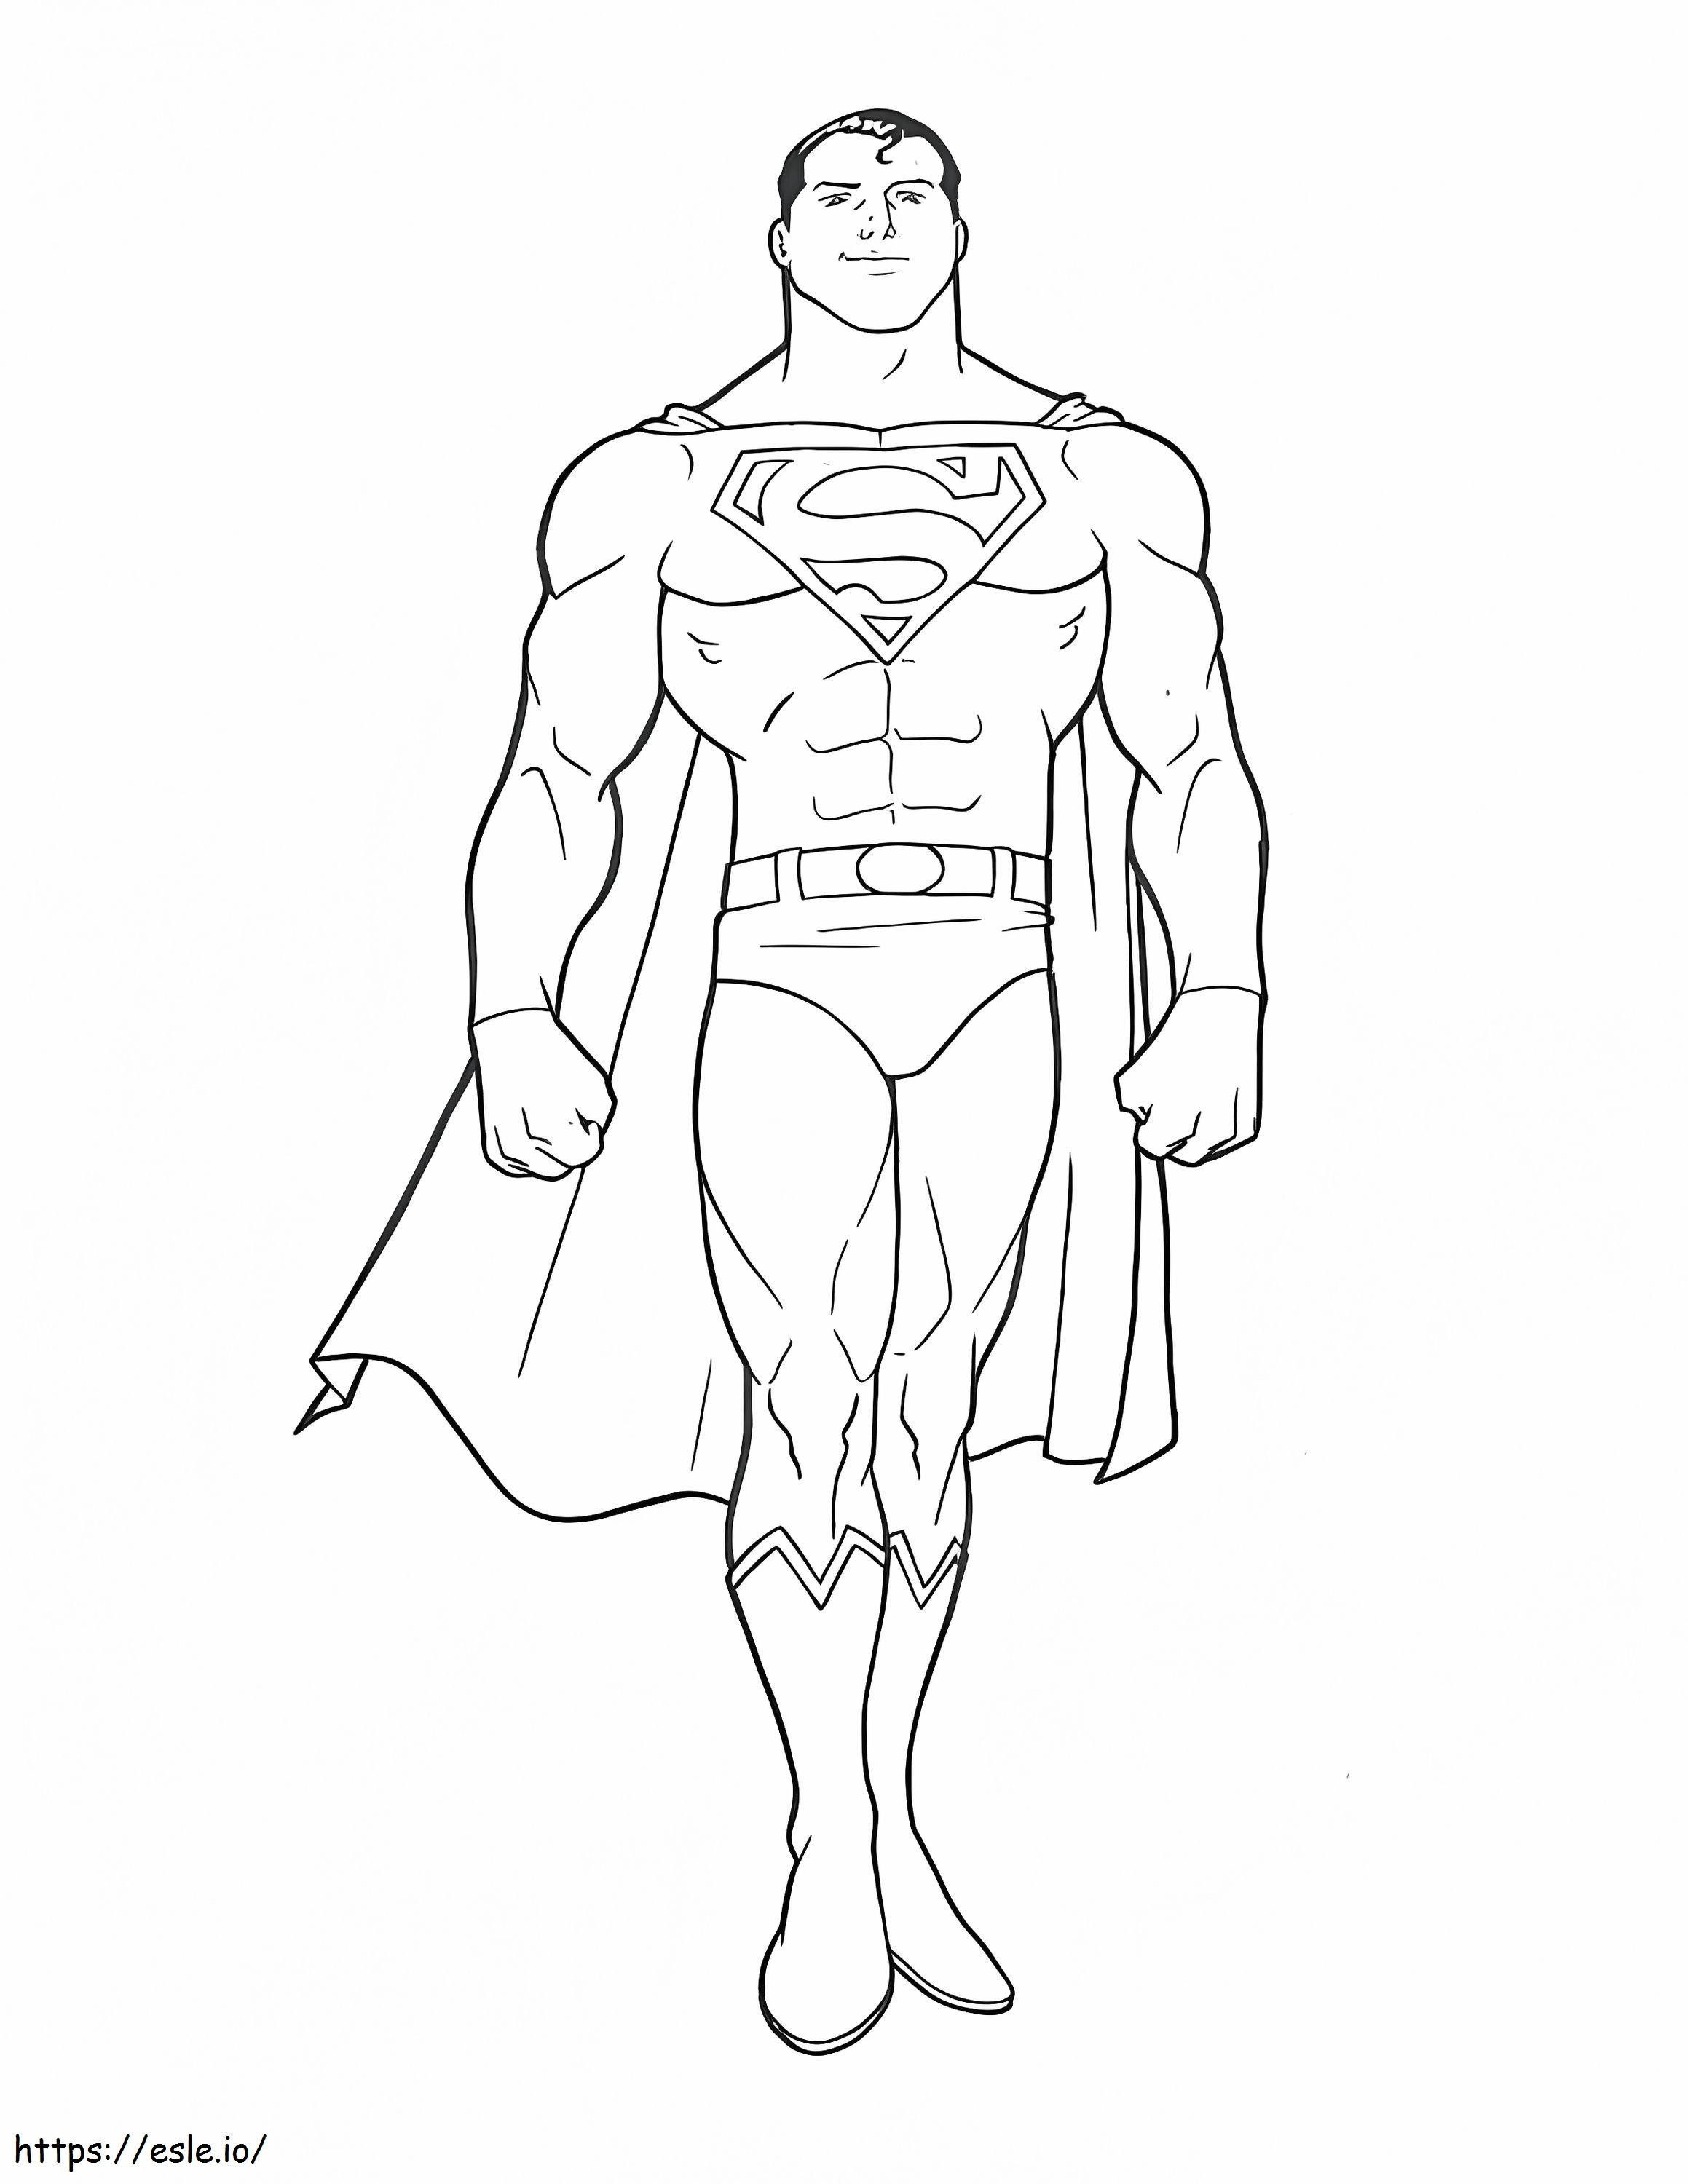 Superman 1 coloring page